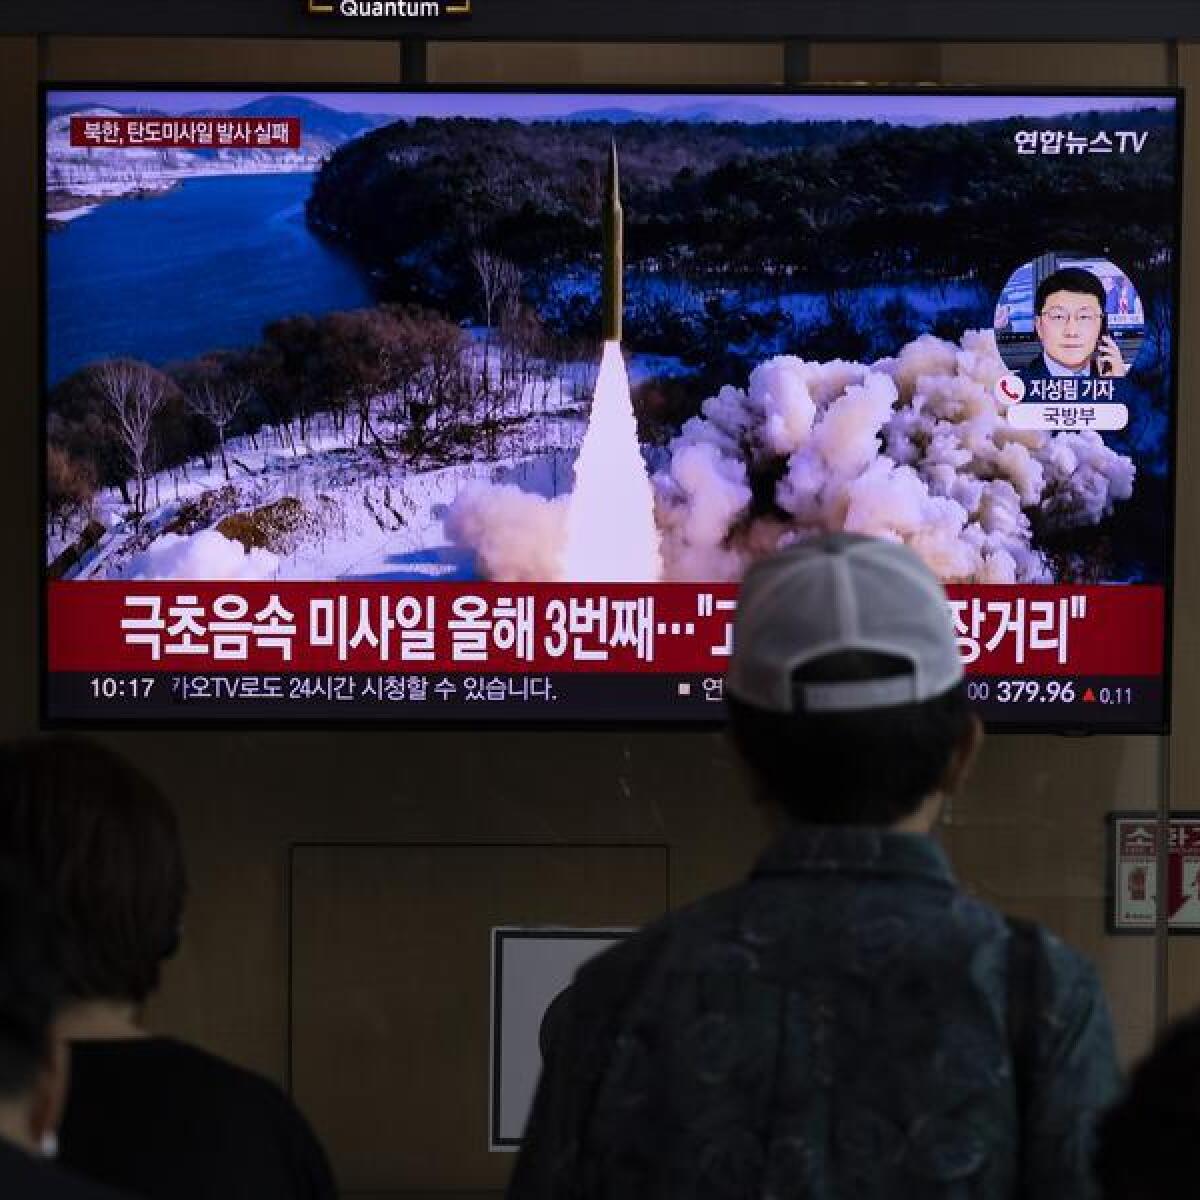 People watch the news at a station in Seoul, South Korea